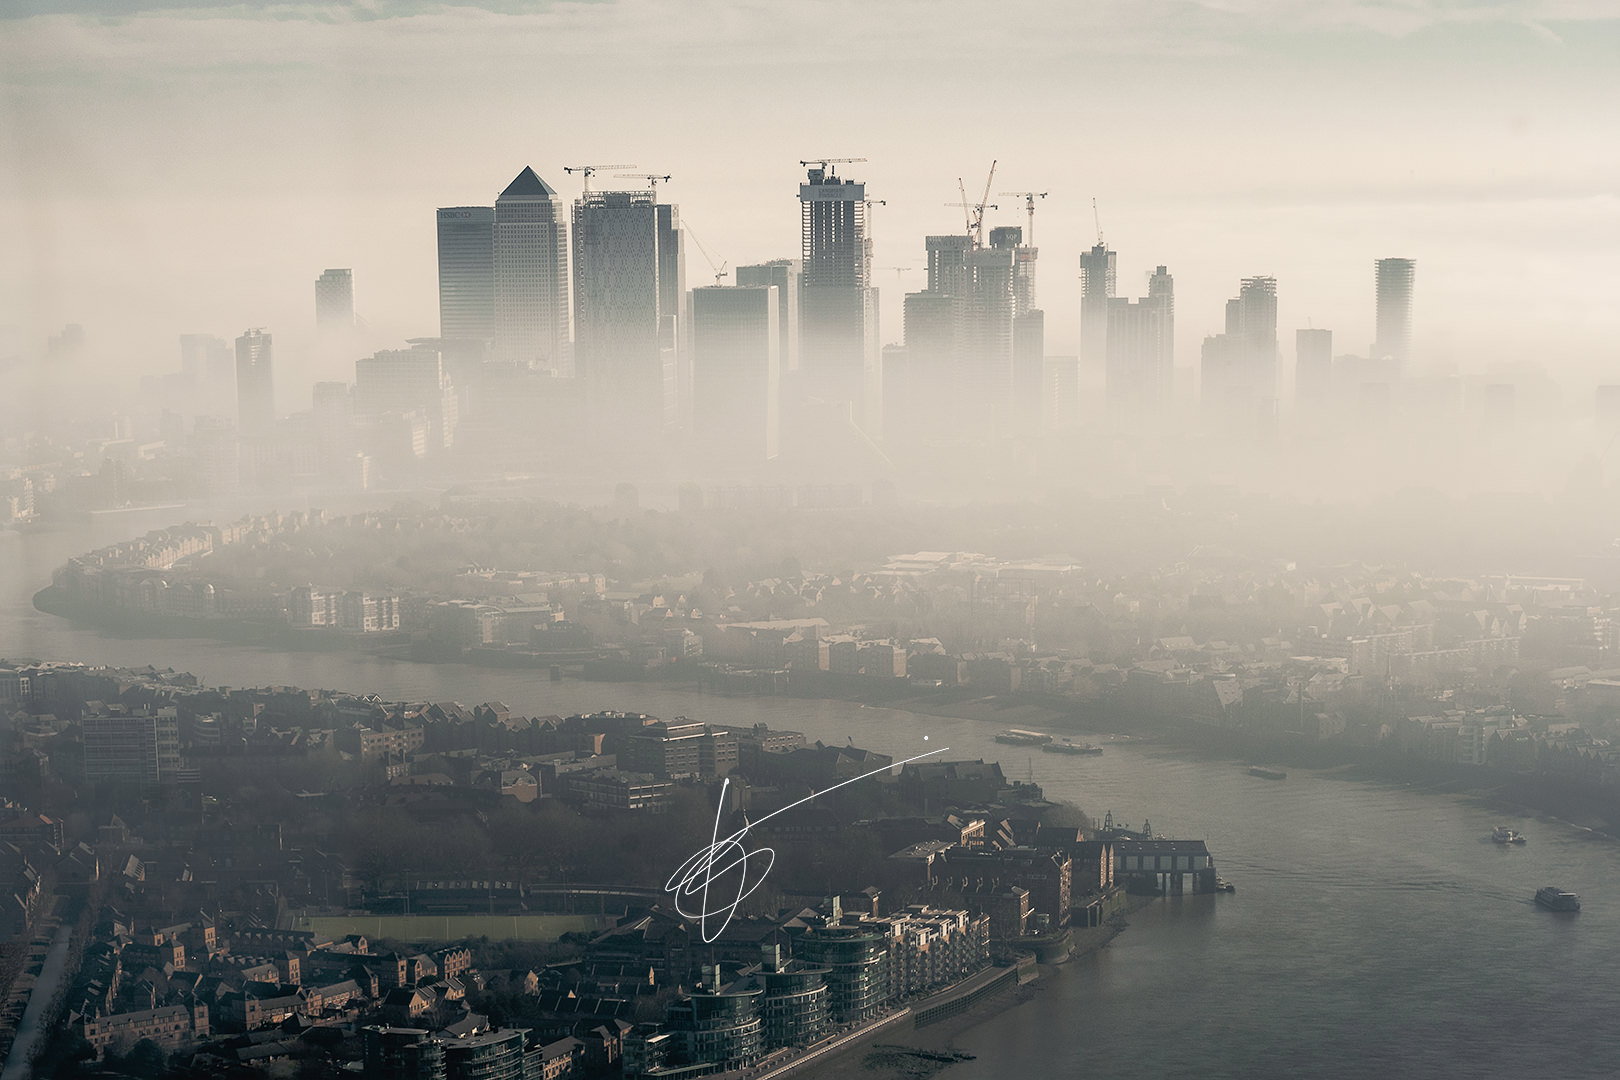 panorama of London surrounded by fog